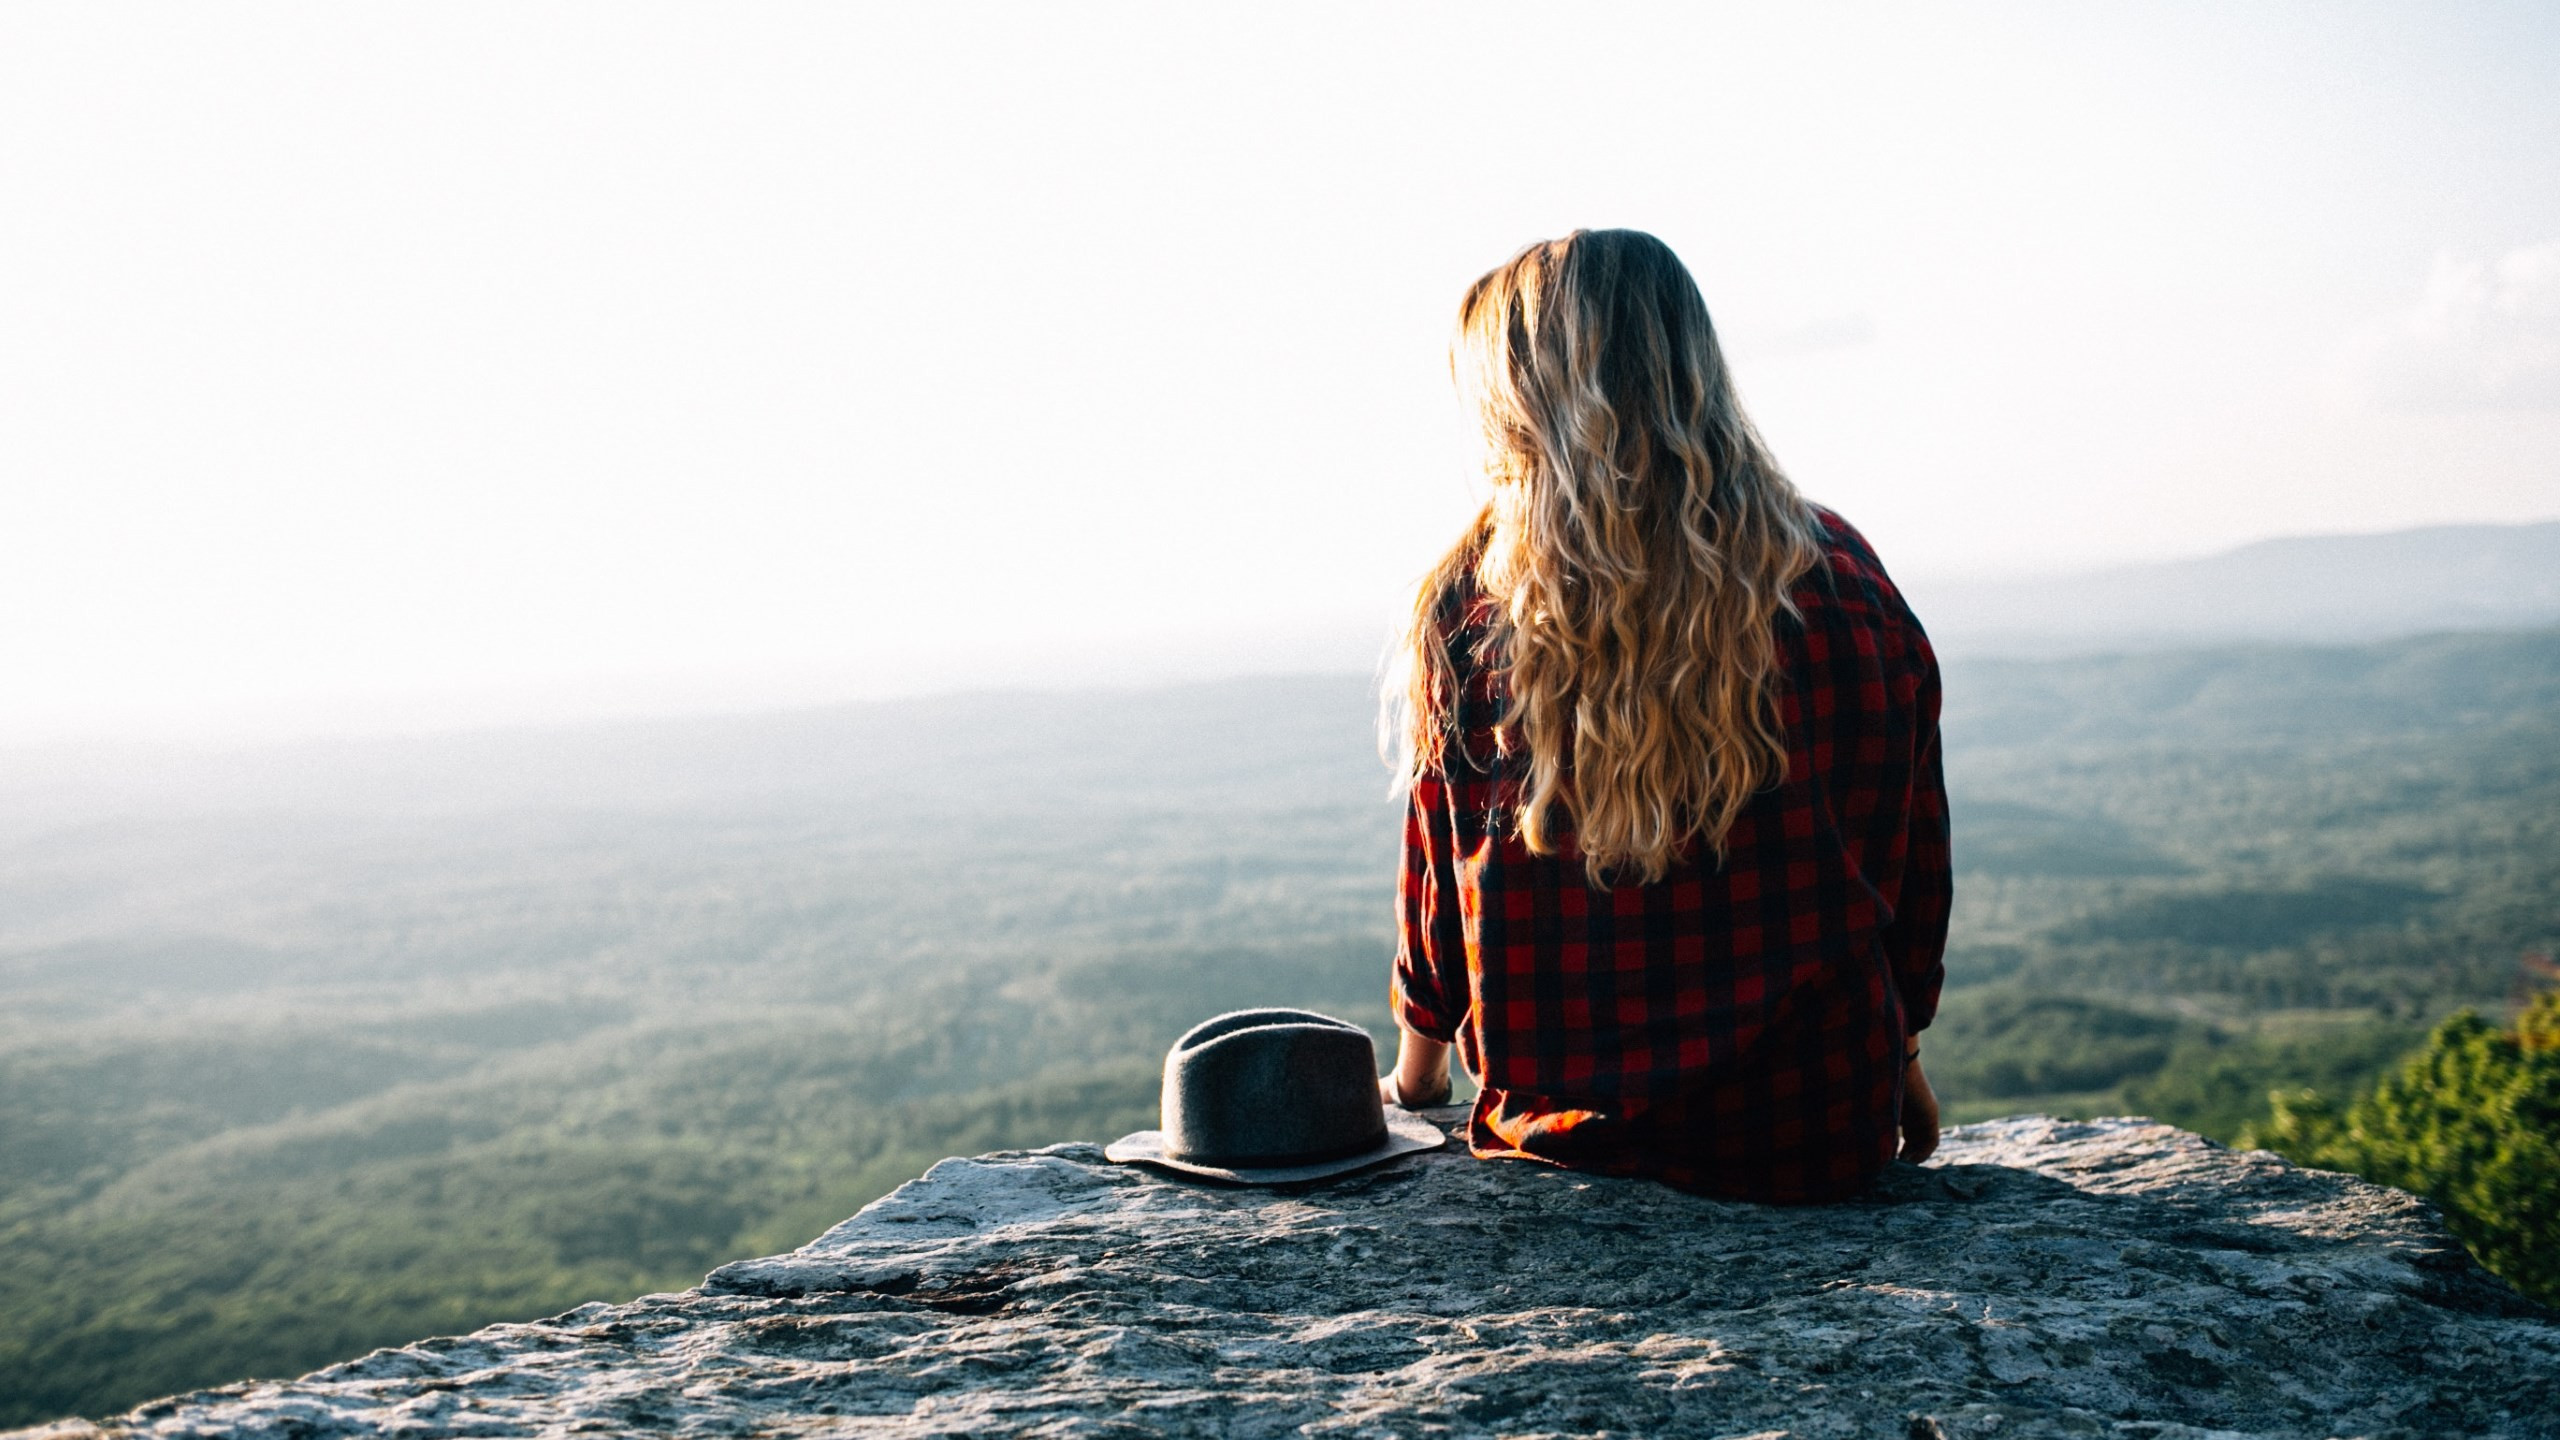 Lady admiring the natural view from Cheaha Mountains, USA wallpaper 2560x1440